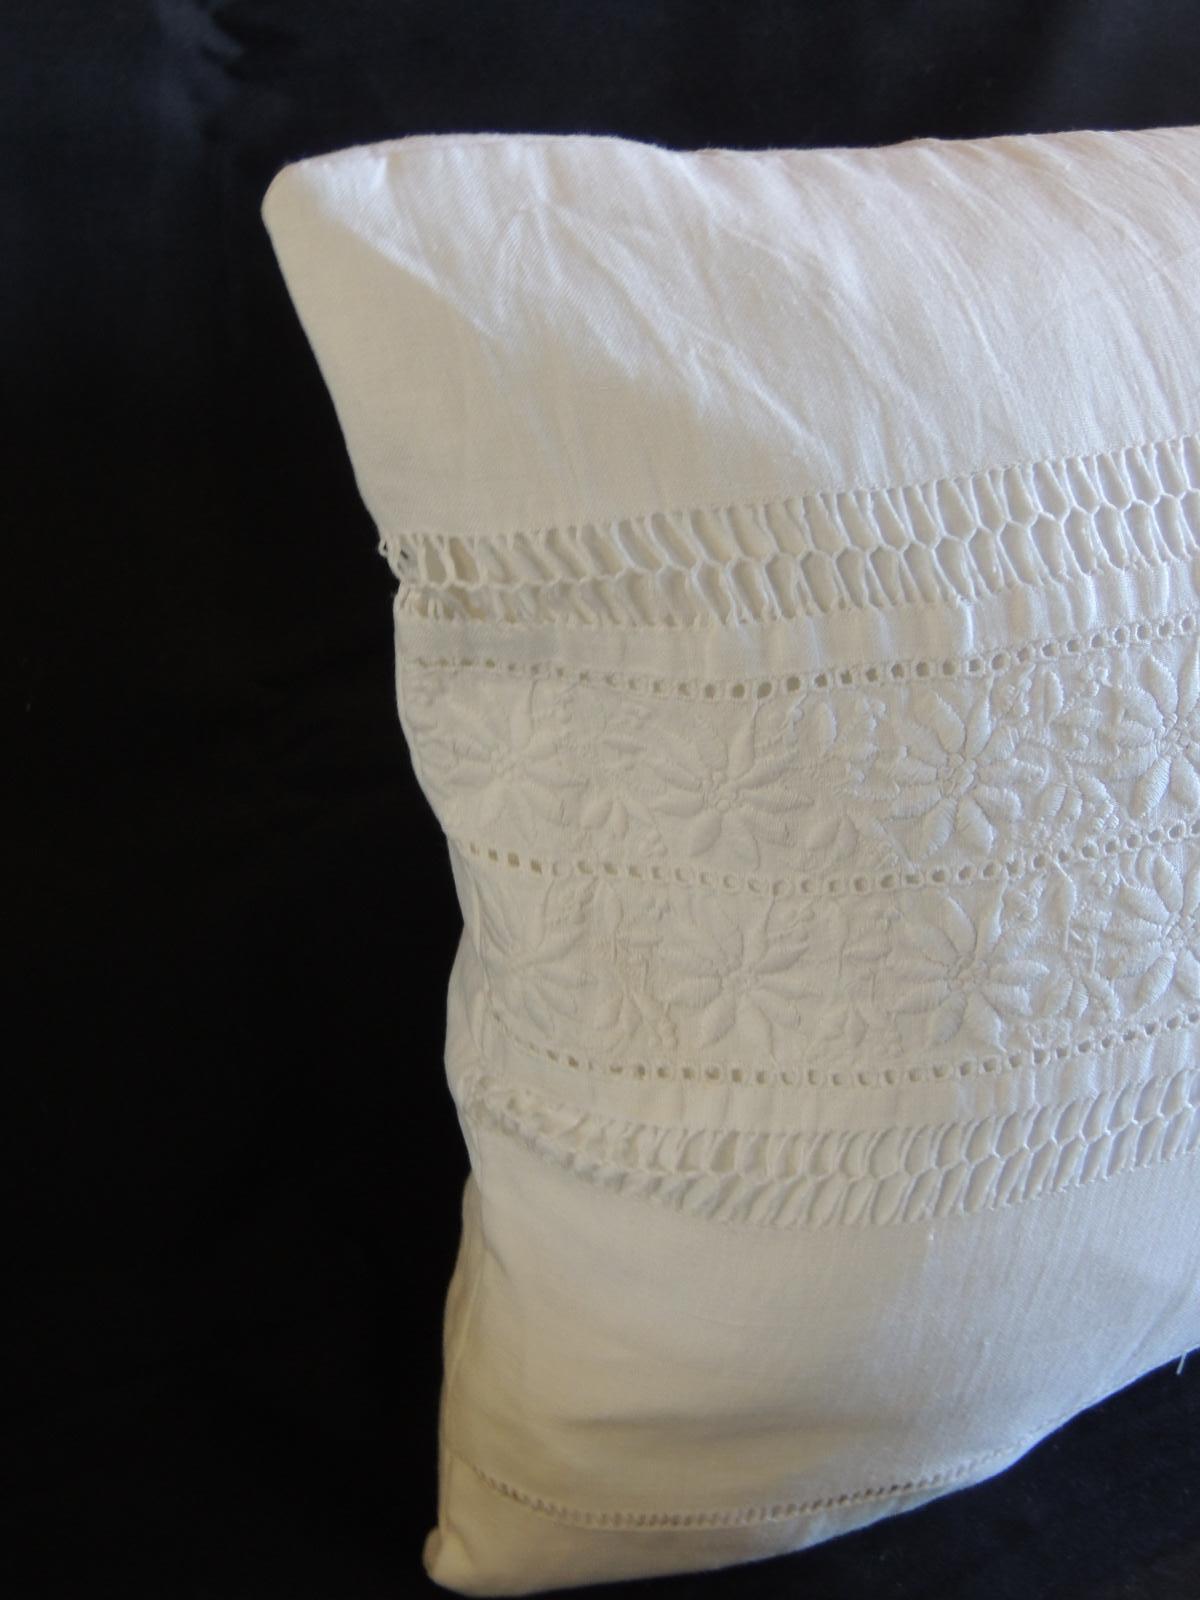 Vintage white on white eyelet lace linen bolster decorative pillow.
Linen backing.
Decorative pillow handcrafted and designed in the USA.
Closure by stitch (no zipper closure) with custom made pillow insert.
Size: 12